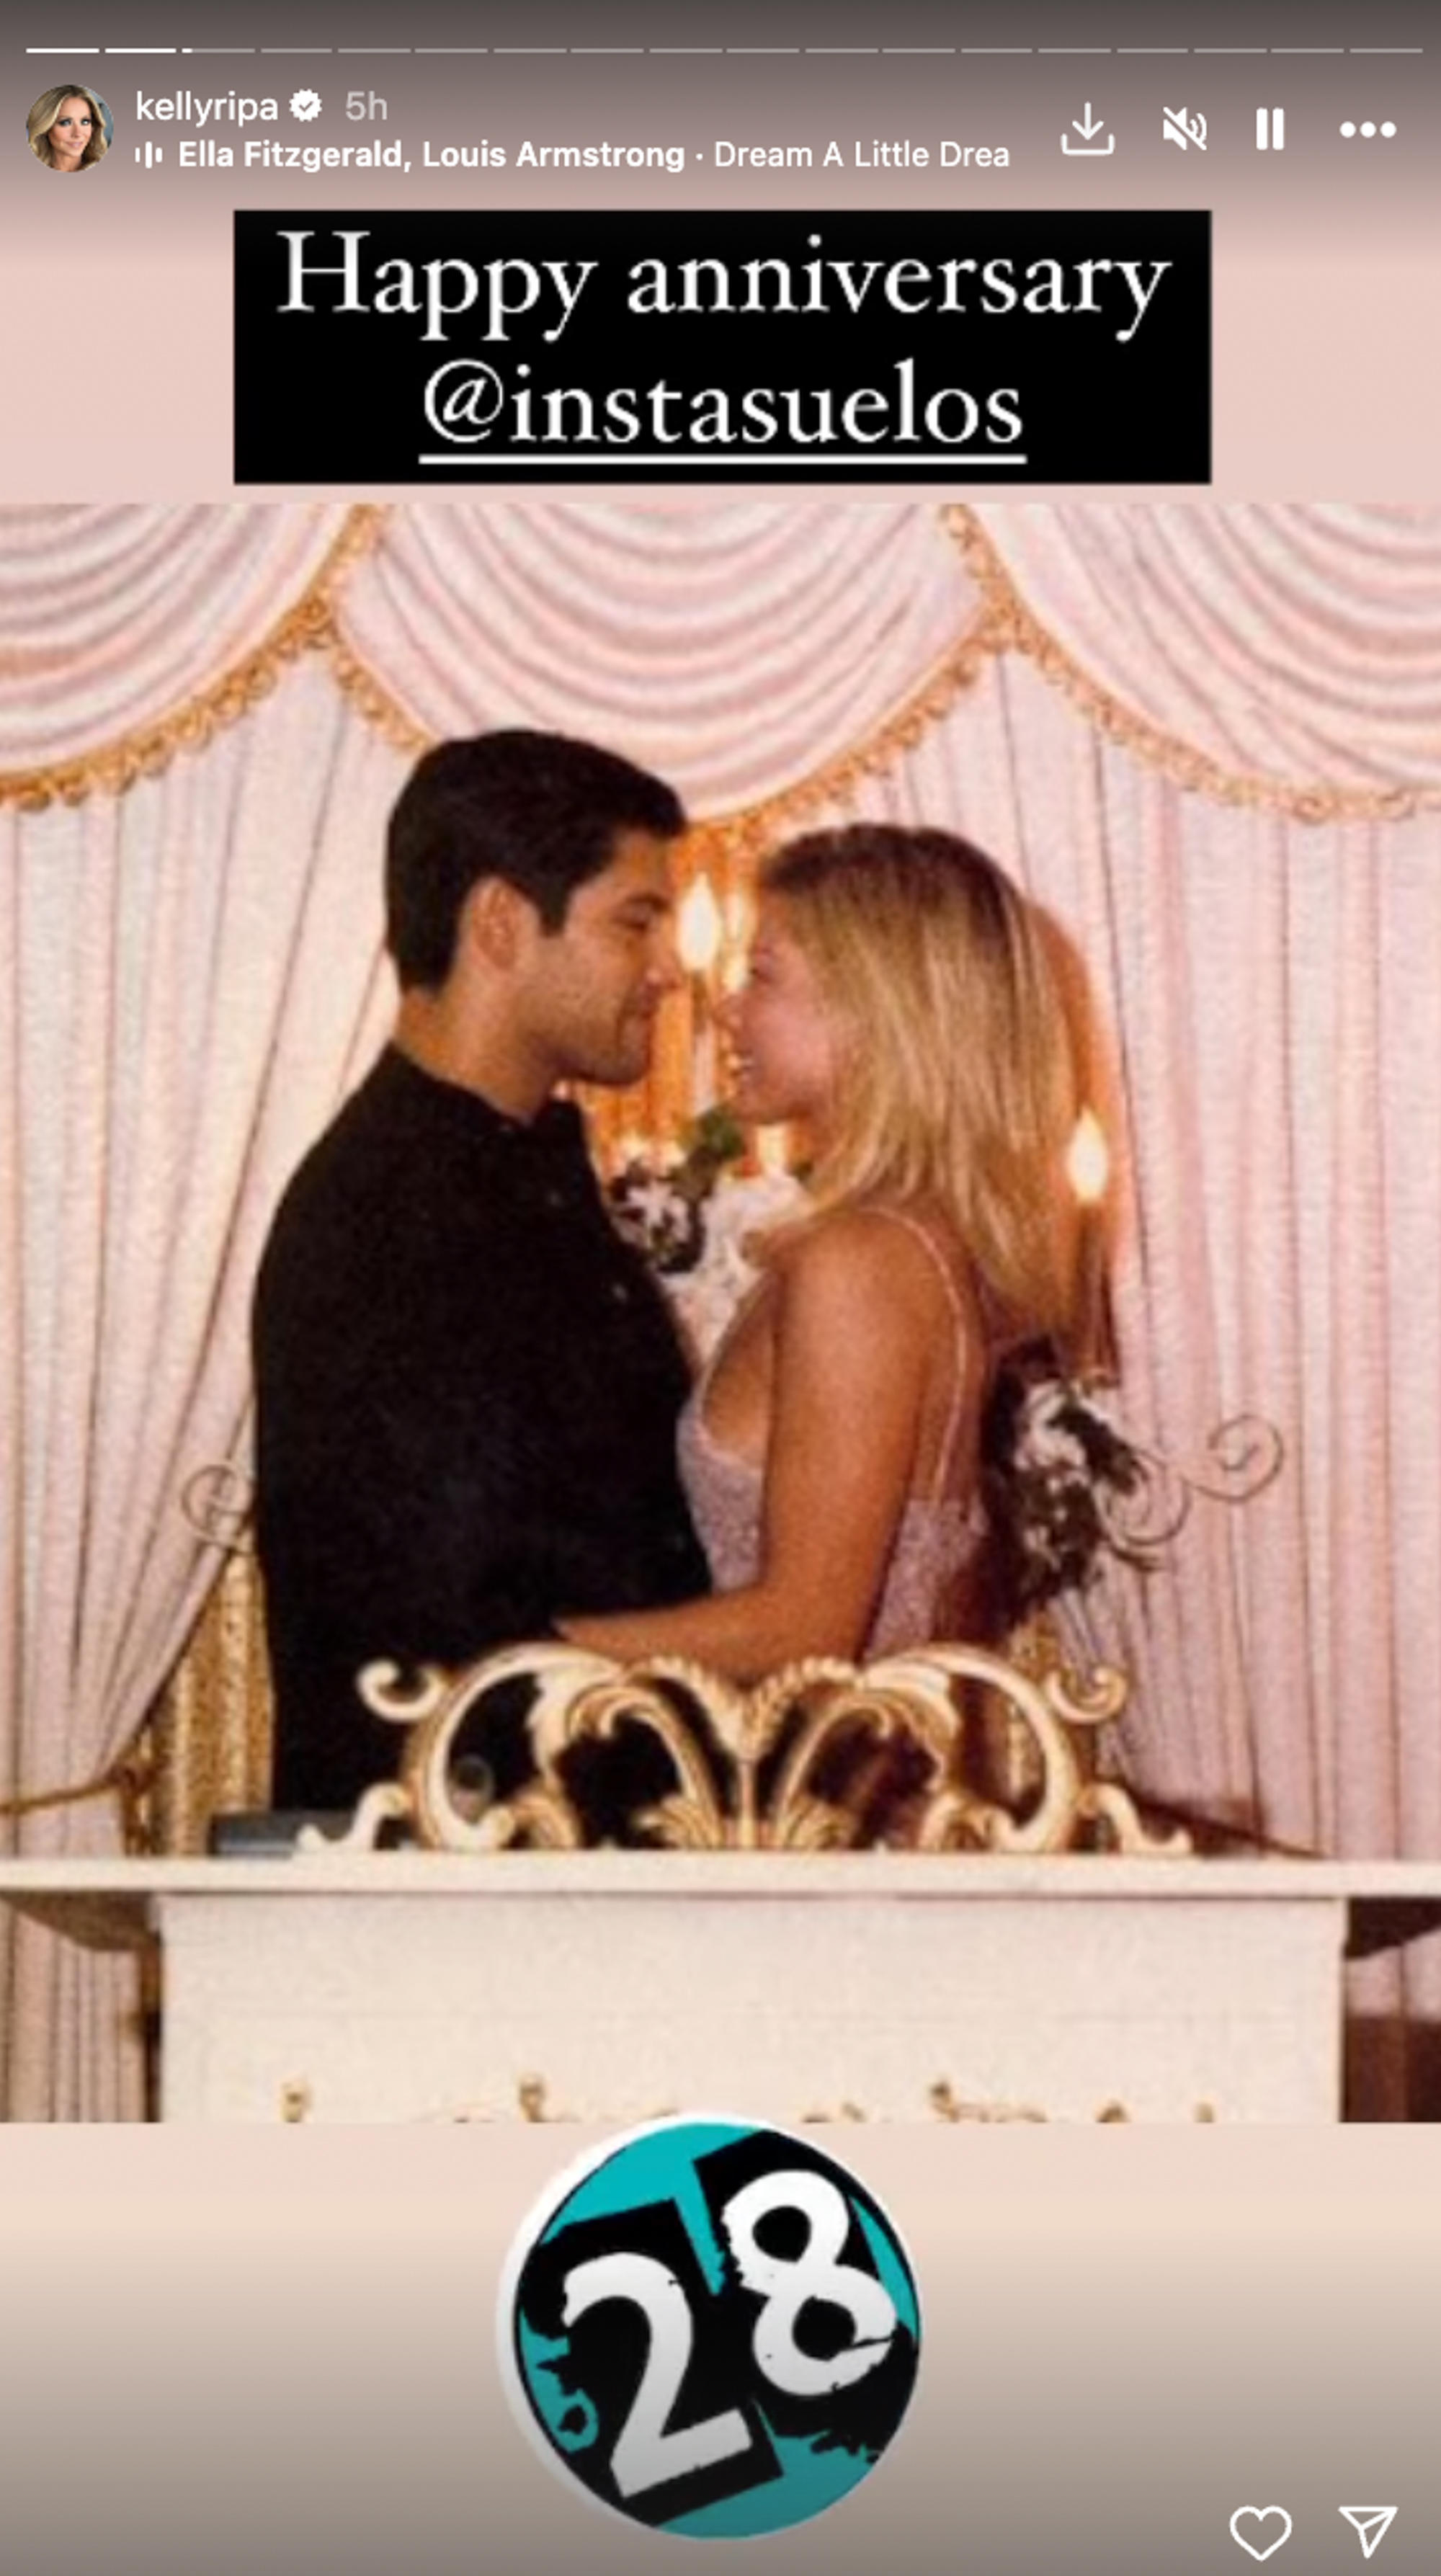 Kelly Ripa and Mark Consuelos getting married in 1996